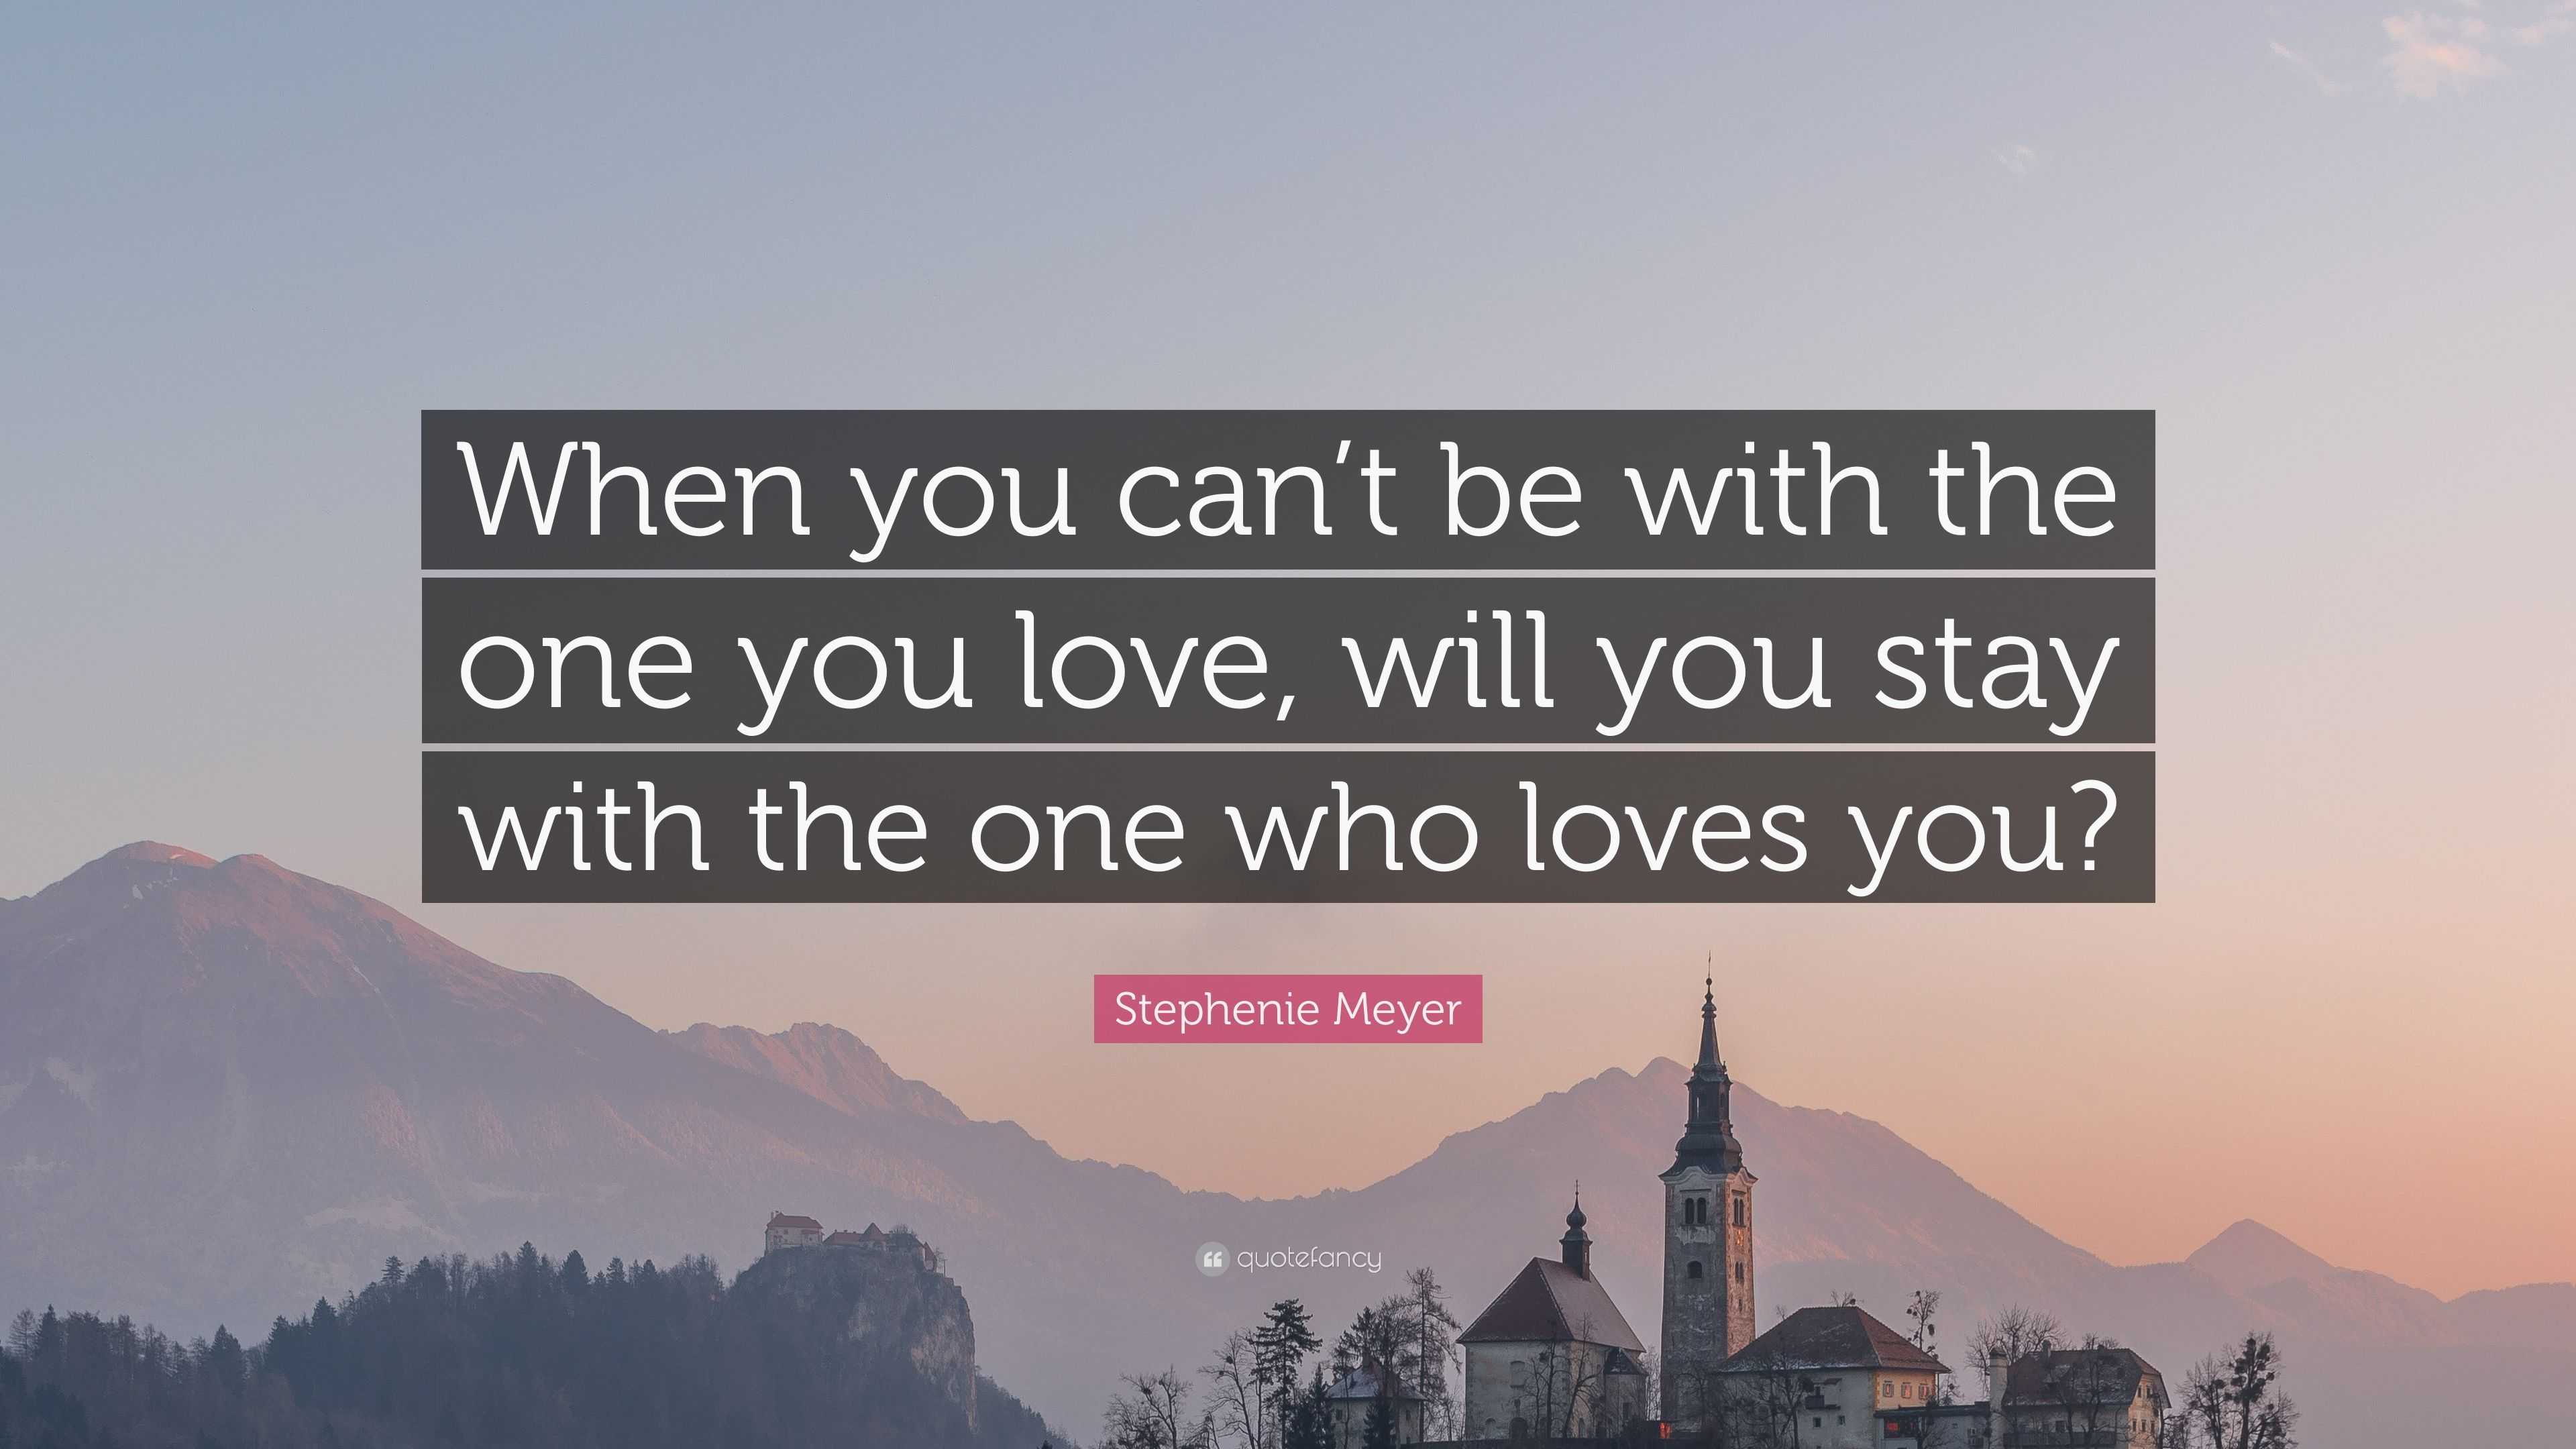 Stephenie Meyer Quote “When you can t be with the one you love